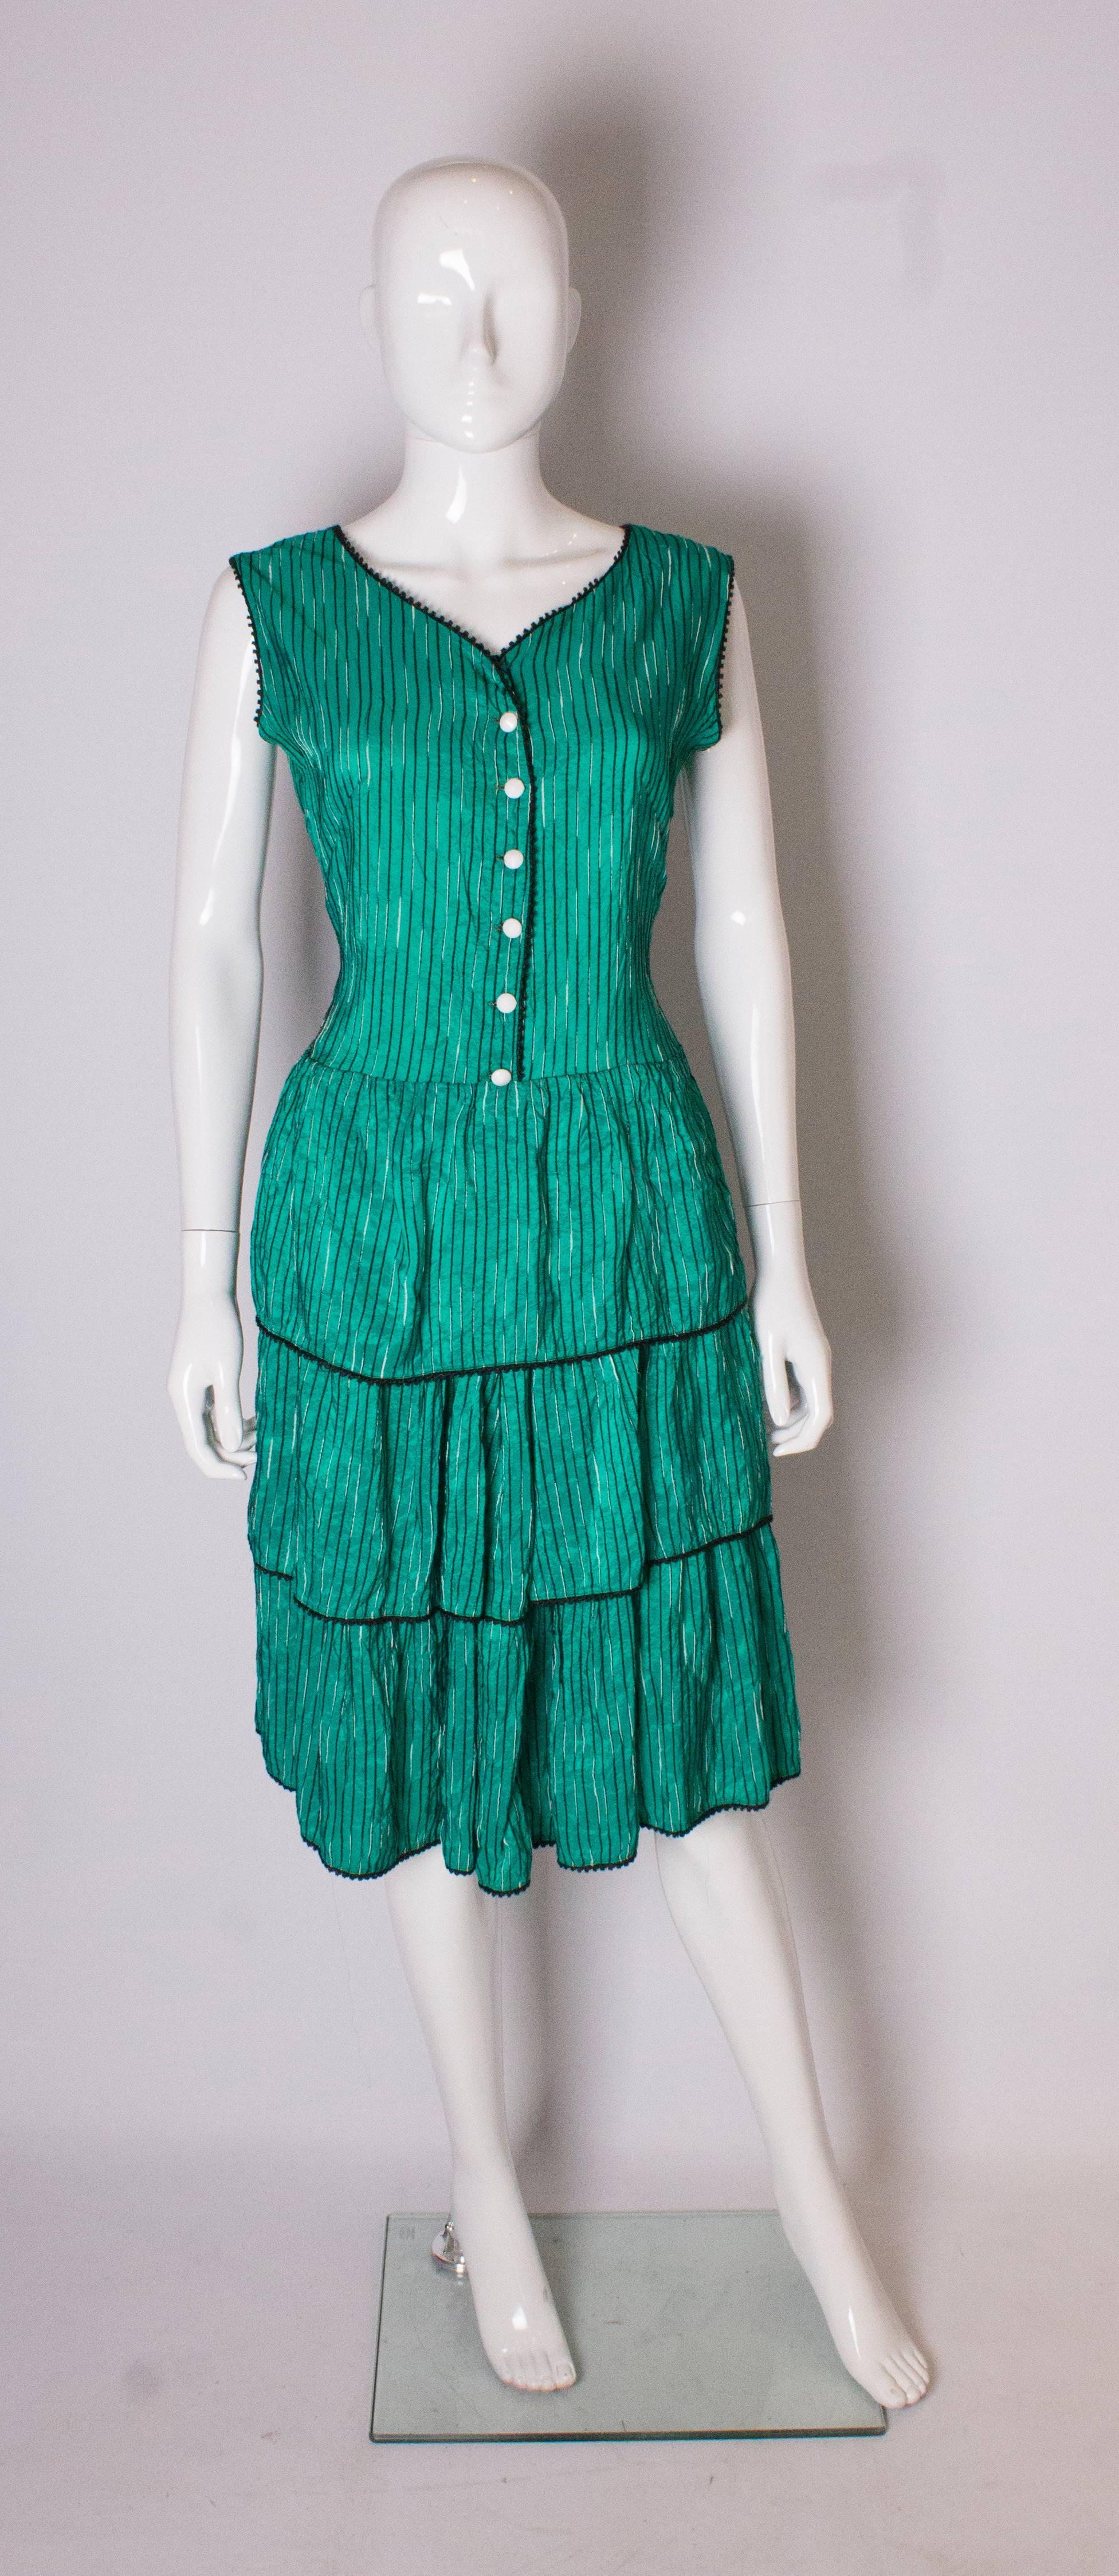 A great vintage sundress in a bright emerald green fabric with black and white stripes, and white buttons down the front.  It has a drop waist, 2 layers of ruffles, and black braid along the neckline and armholes.